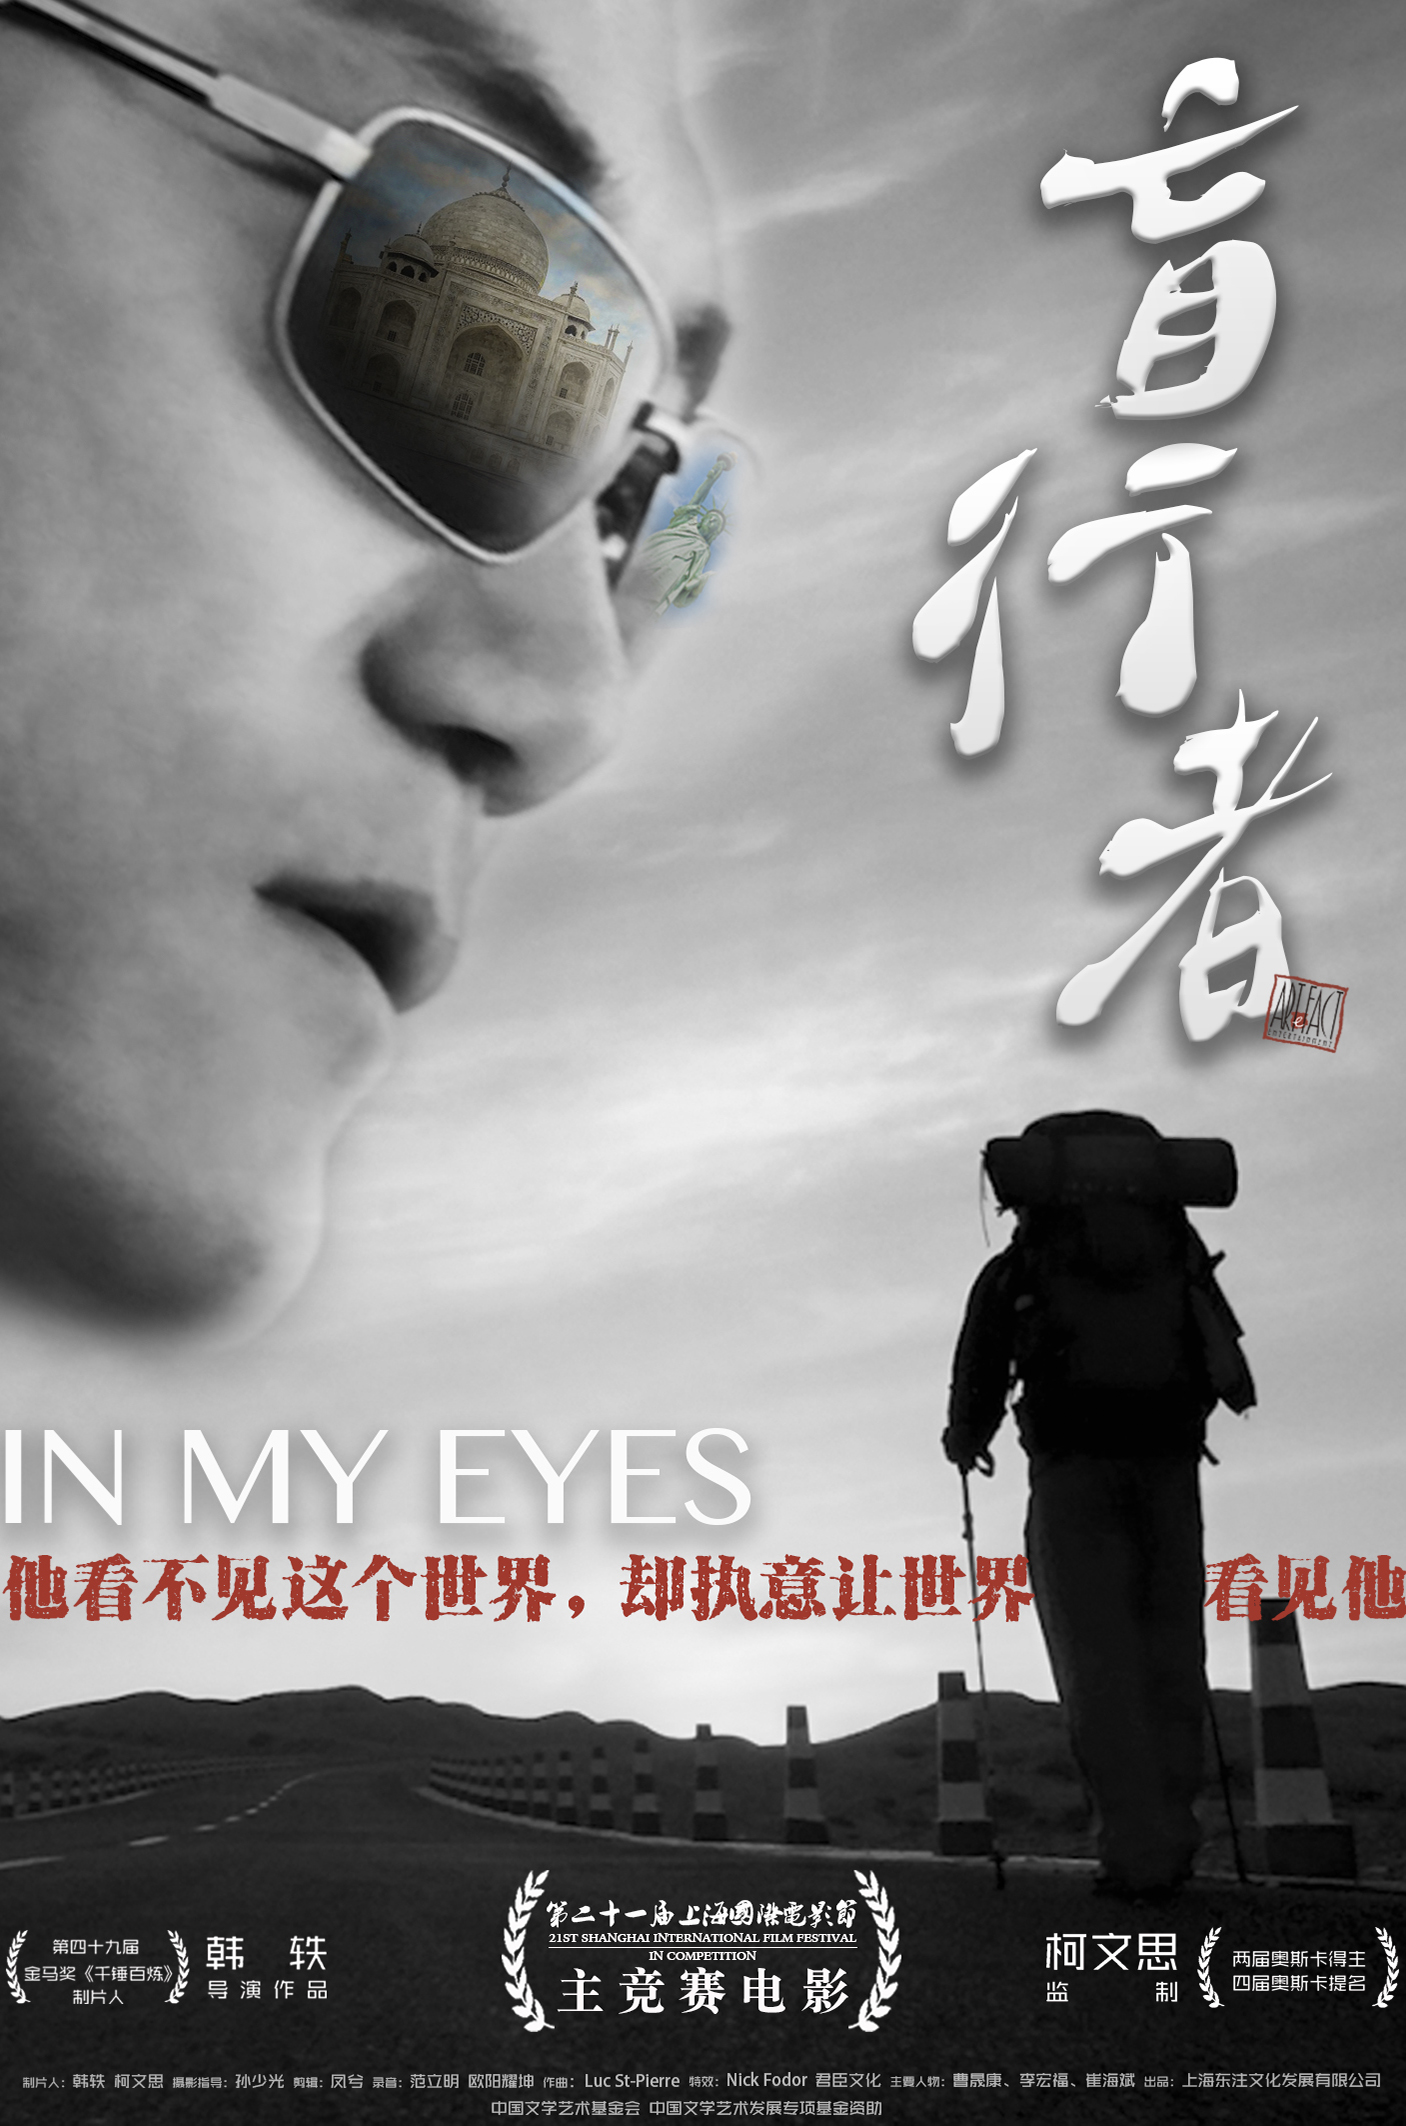 Shanghai: Documentary ‘In My Eyes’ Is Triumph of Will Onscreen and Off